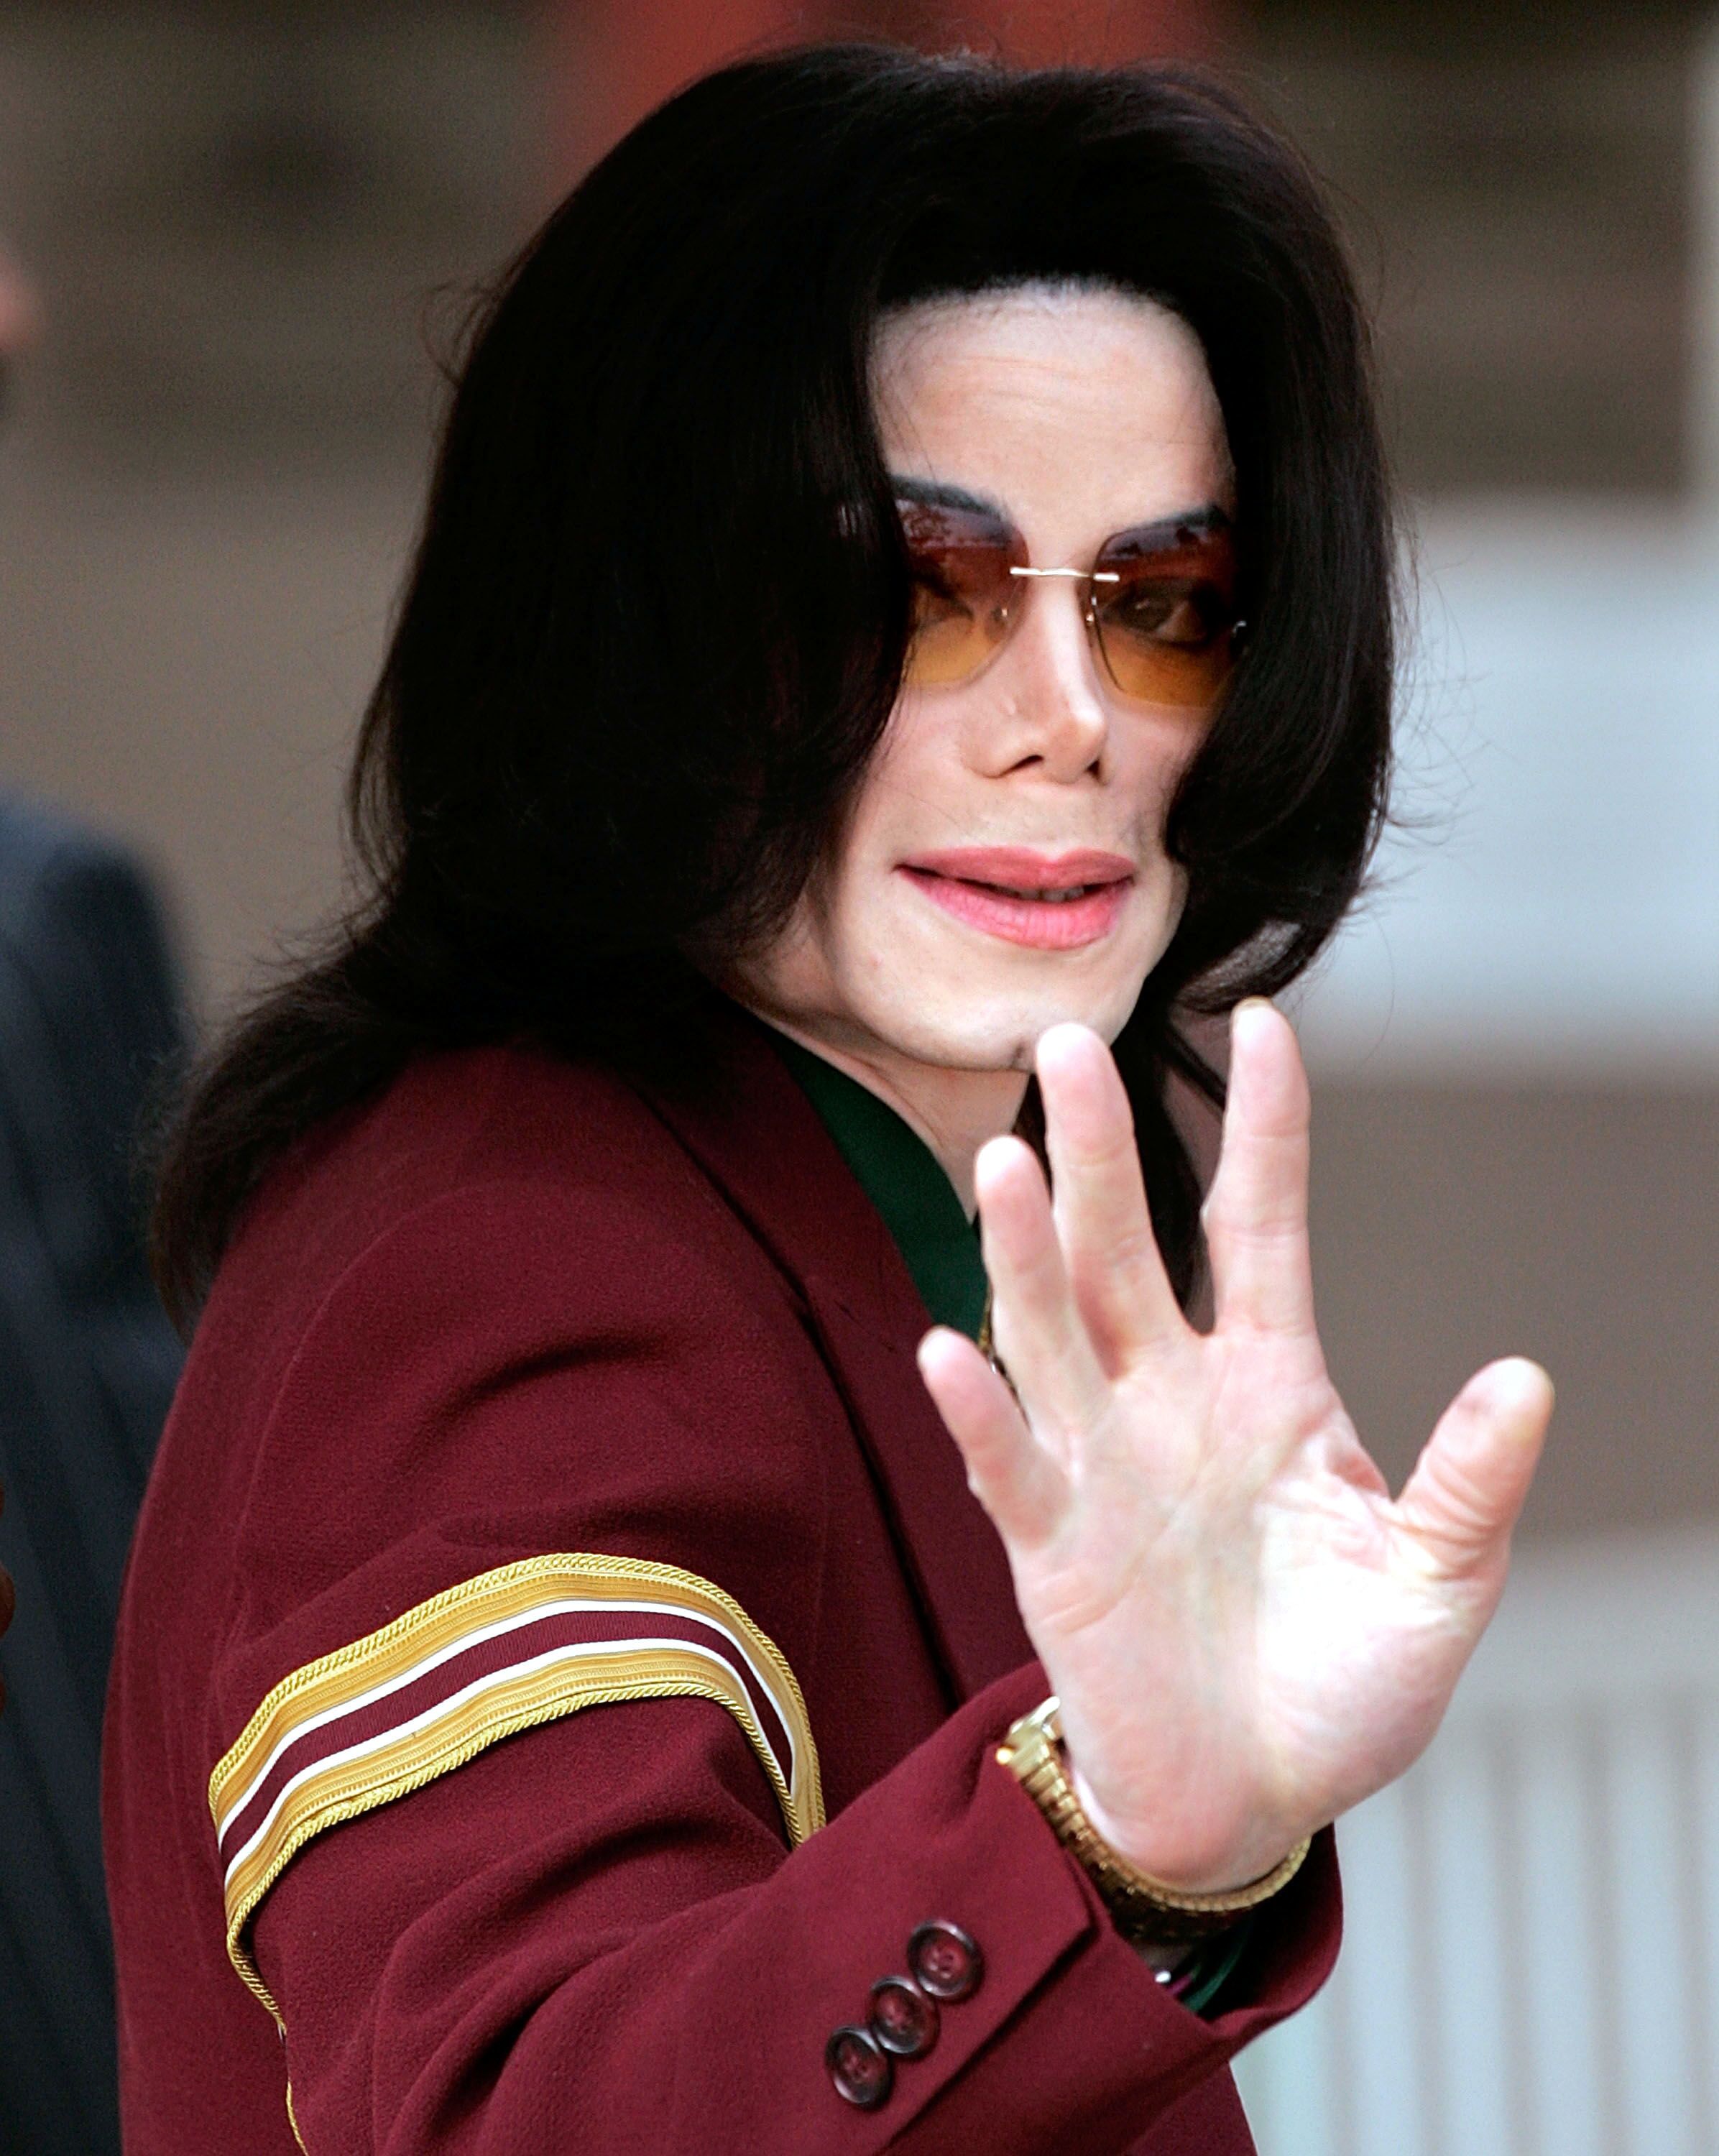 Michael Jackson arrives at the Santa Maria Superior Court for testimony during the third week of his child molestation trial March 17, 2005 in Santa Maria, California | Photo: Getty Images